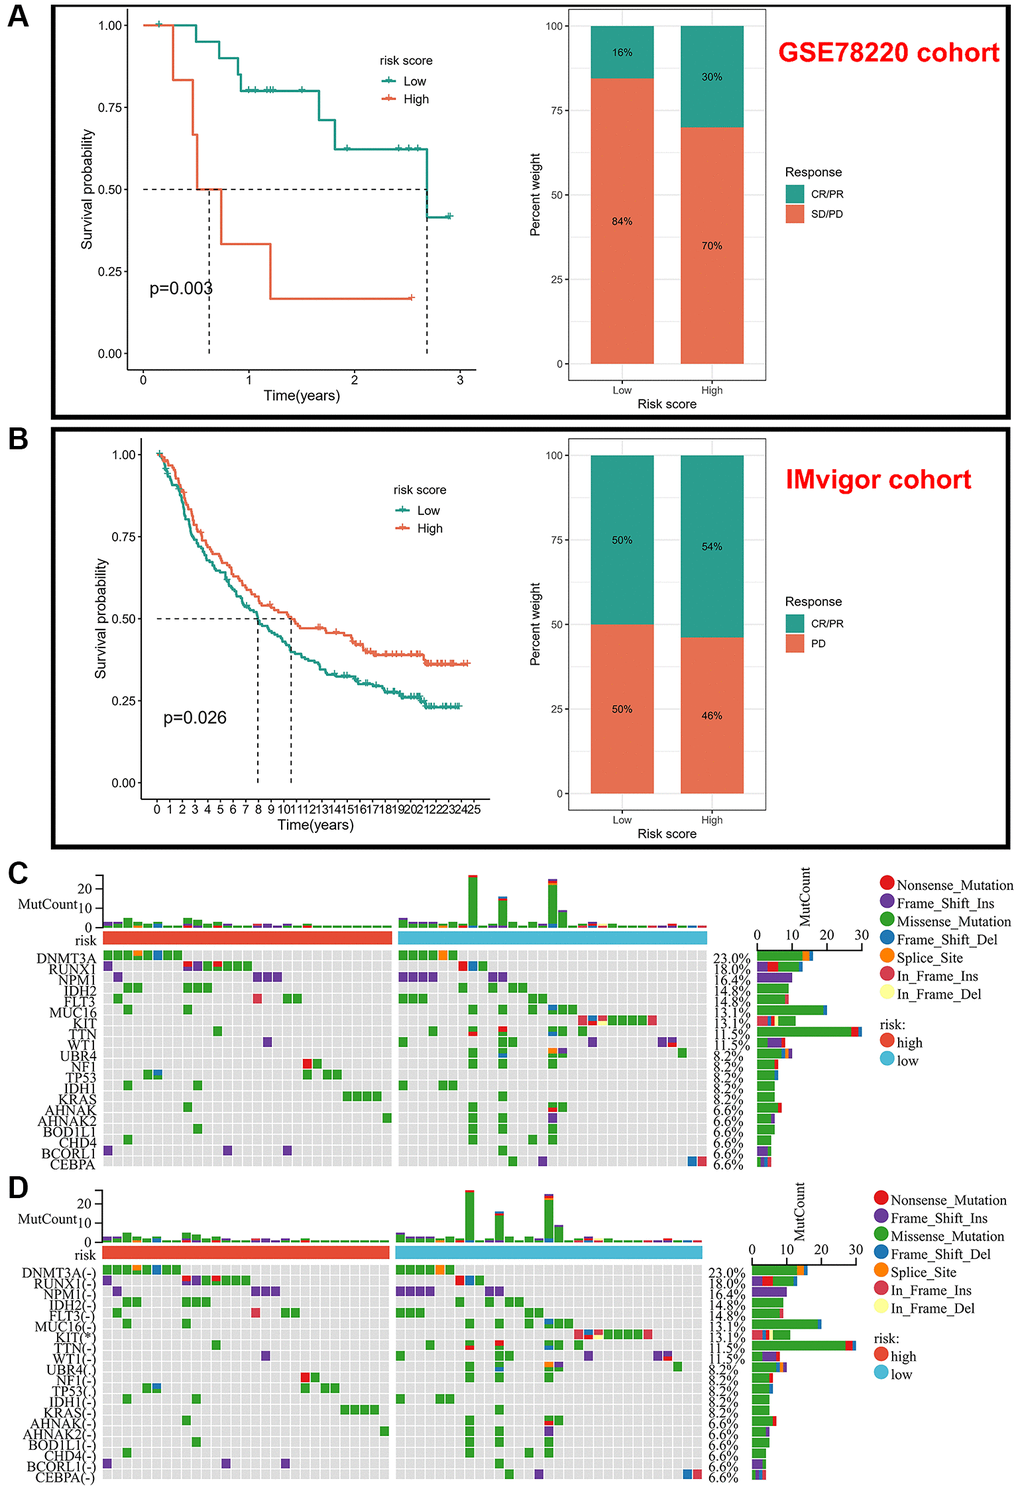 Validation of risk scores in different immunotherapy cohorts. (A) Kaplan-Meier analysis of different risk scores and response to drugs in the GSE78220 cohort. (B) Kaplan-Meier analysis of different risk scores and response to drugs in the IMvigor-210 cohort. (C, D) Frequency of somatic mutations in different risk score groups.